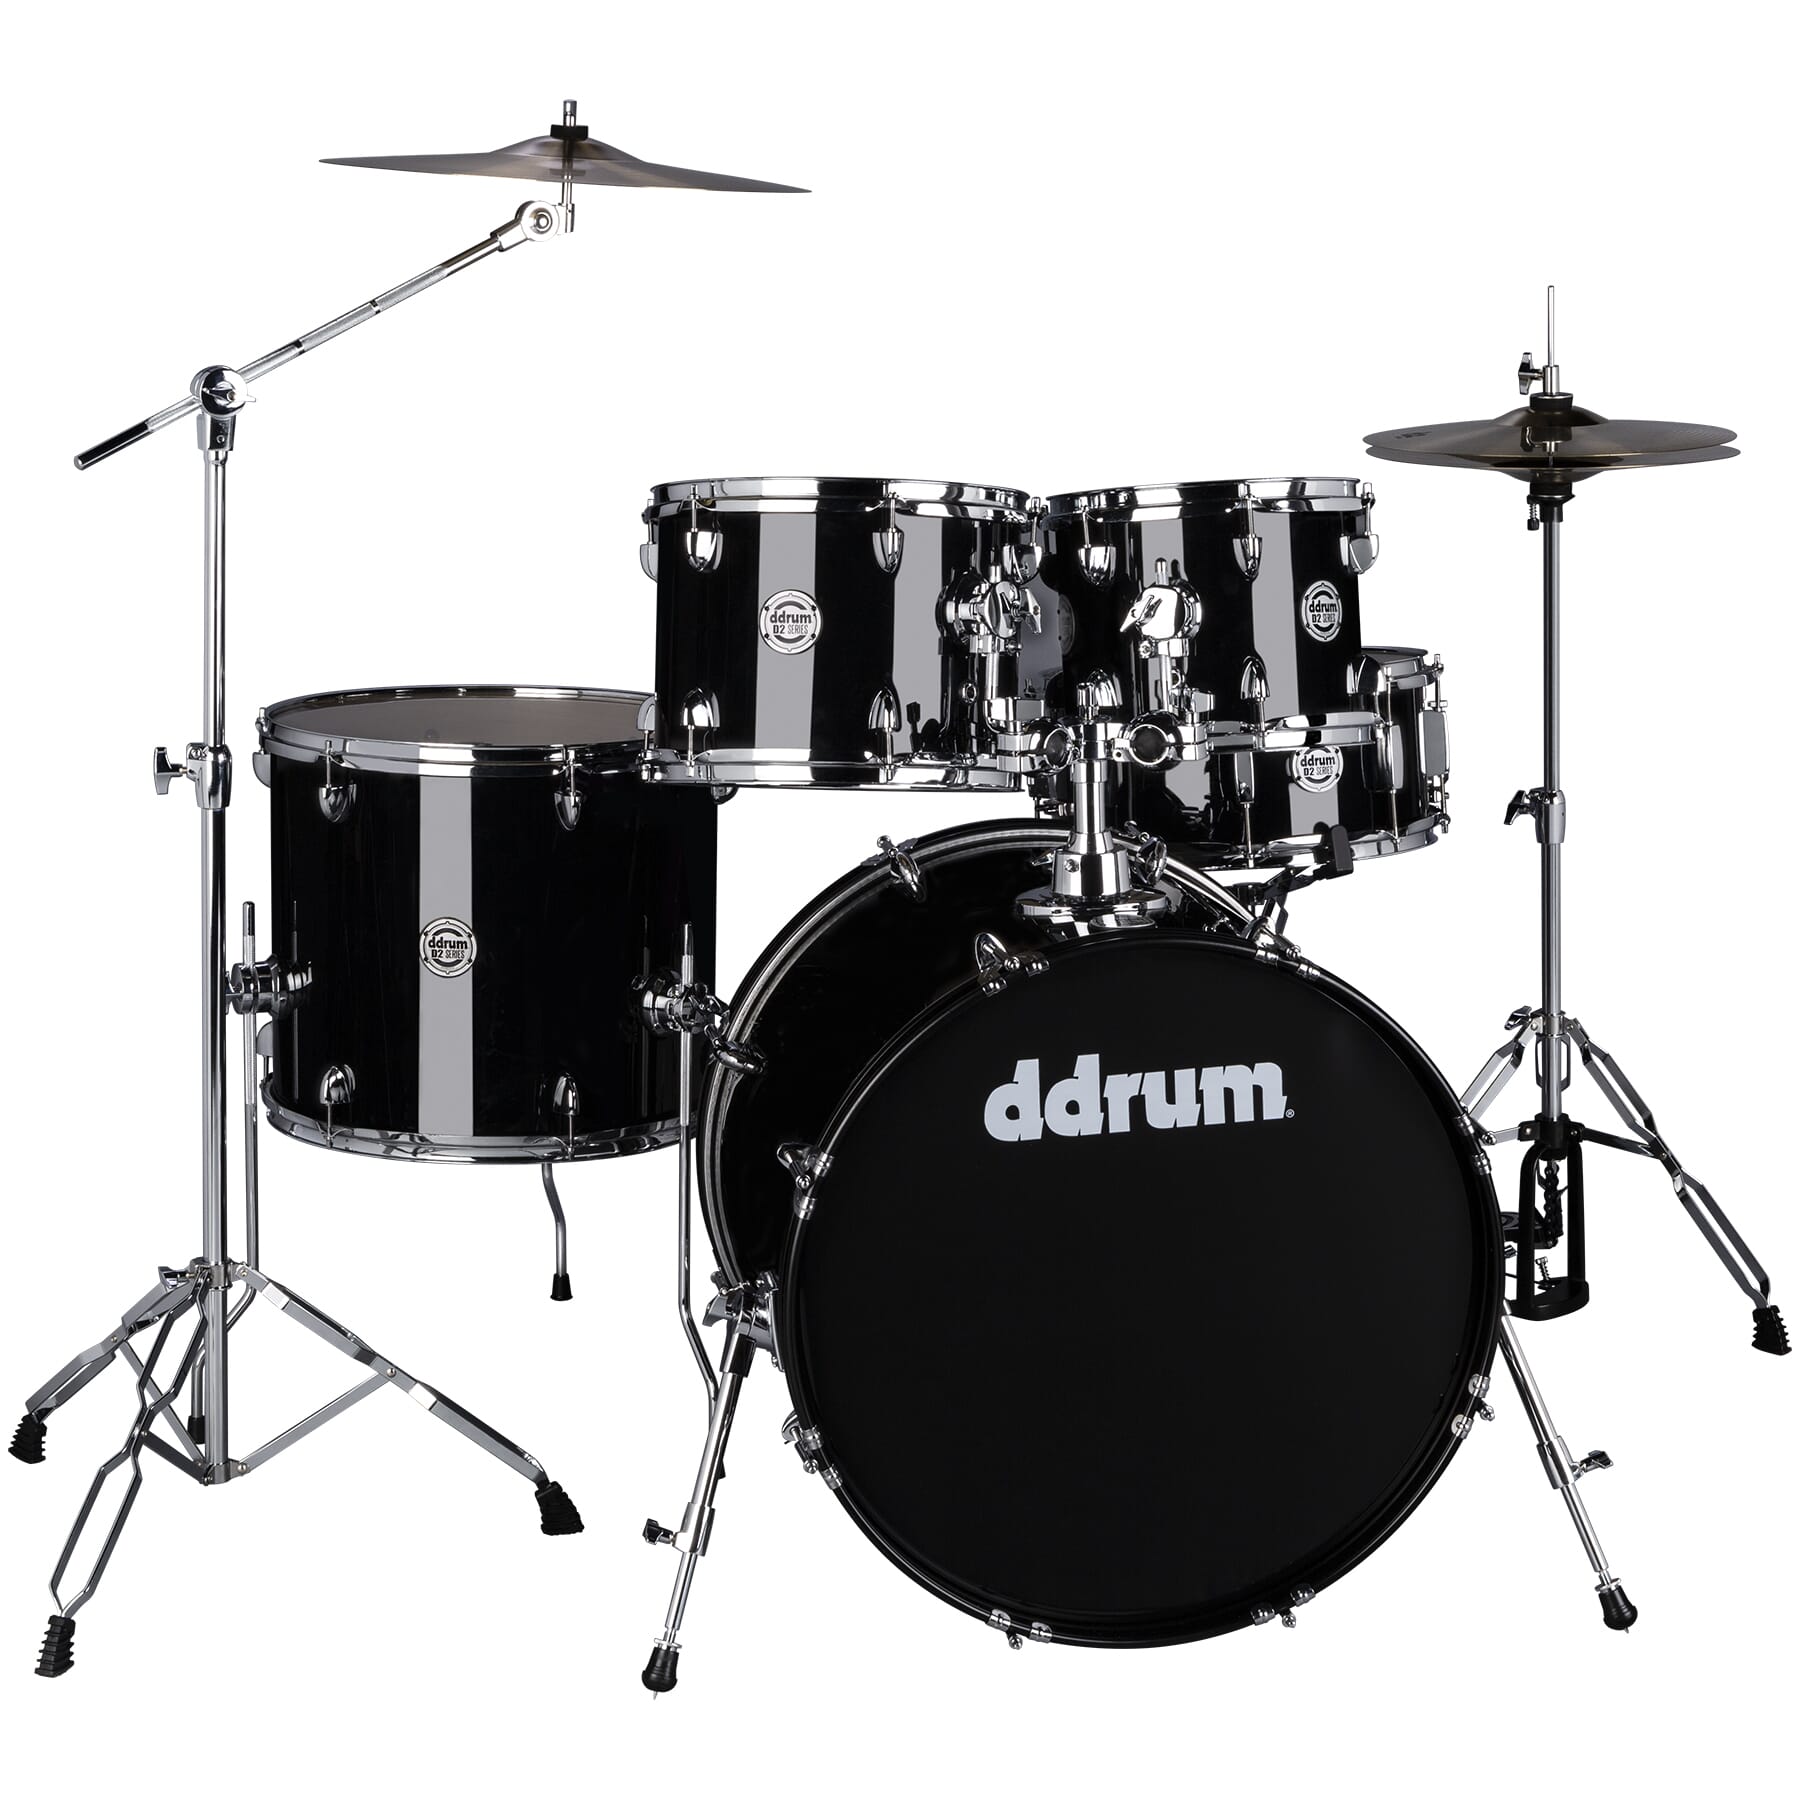 D2- Midnight Black - Complete drum set with cymbals